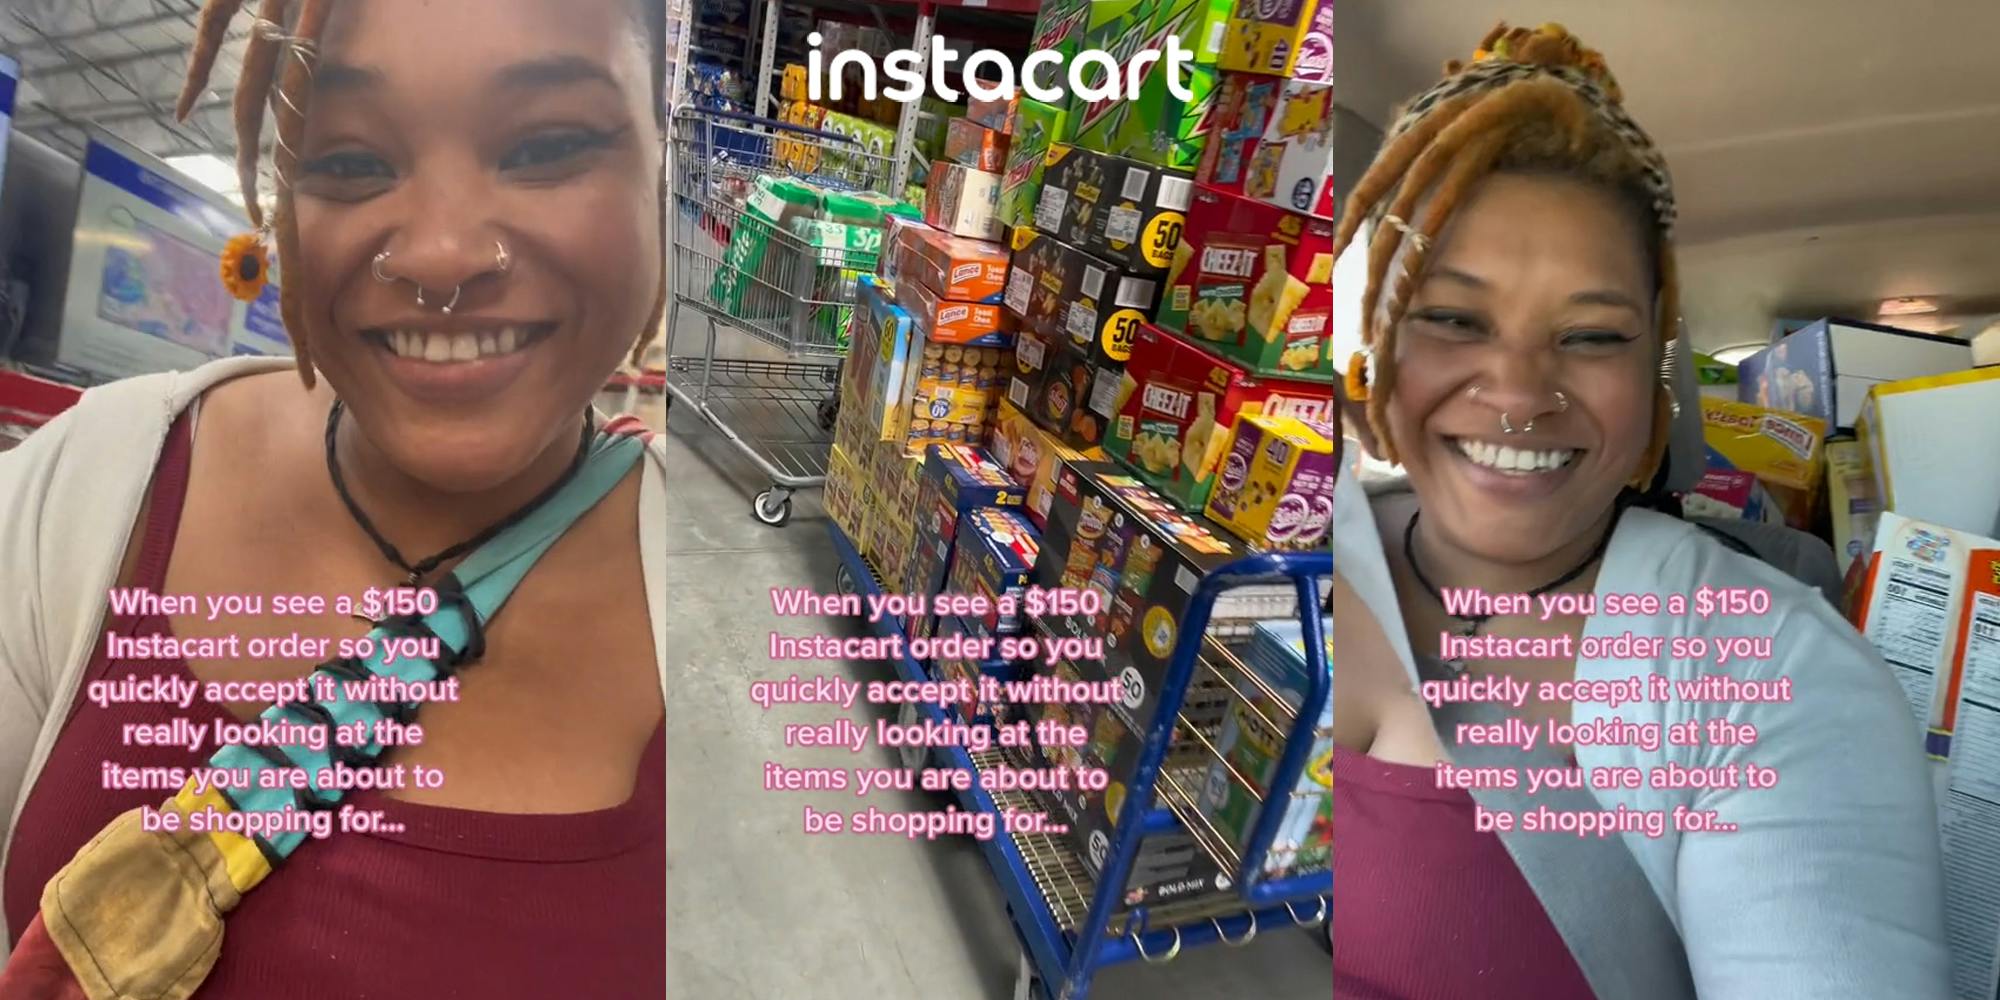 Instacart shopper shopping with caption "When you see a $150 Instacart order so you quickly accept it without really looking at the items you are about to be shopping for..." (l) cart full of groceries with Instacart logo above and caption "When you see a $150 Instacart order so you quickly accept it without really looking at the items you are about to be shopping for..." (c) Instacart shopper in car full of groceries with caption "When you see a $150 Instacart order so you quickly accept it without really looking at the items you are about to be shopping for..." (r)